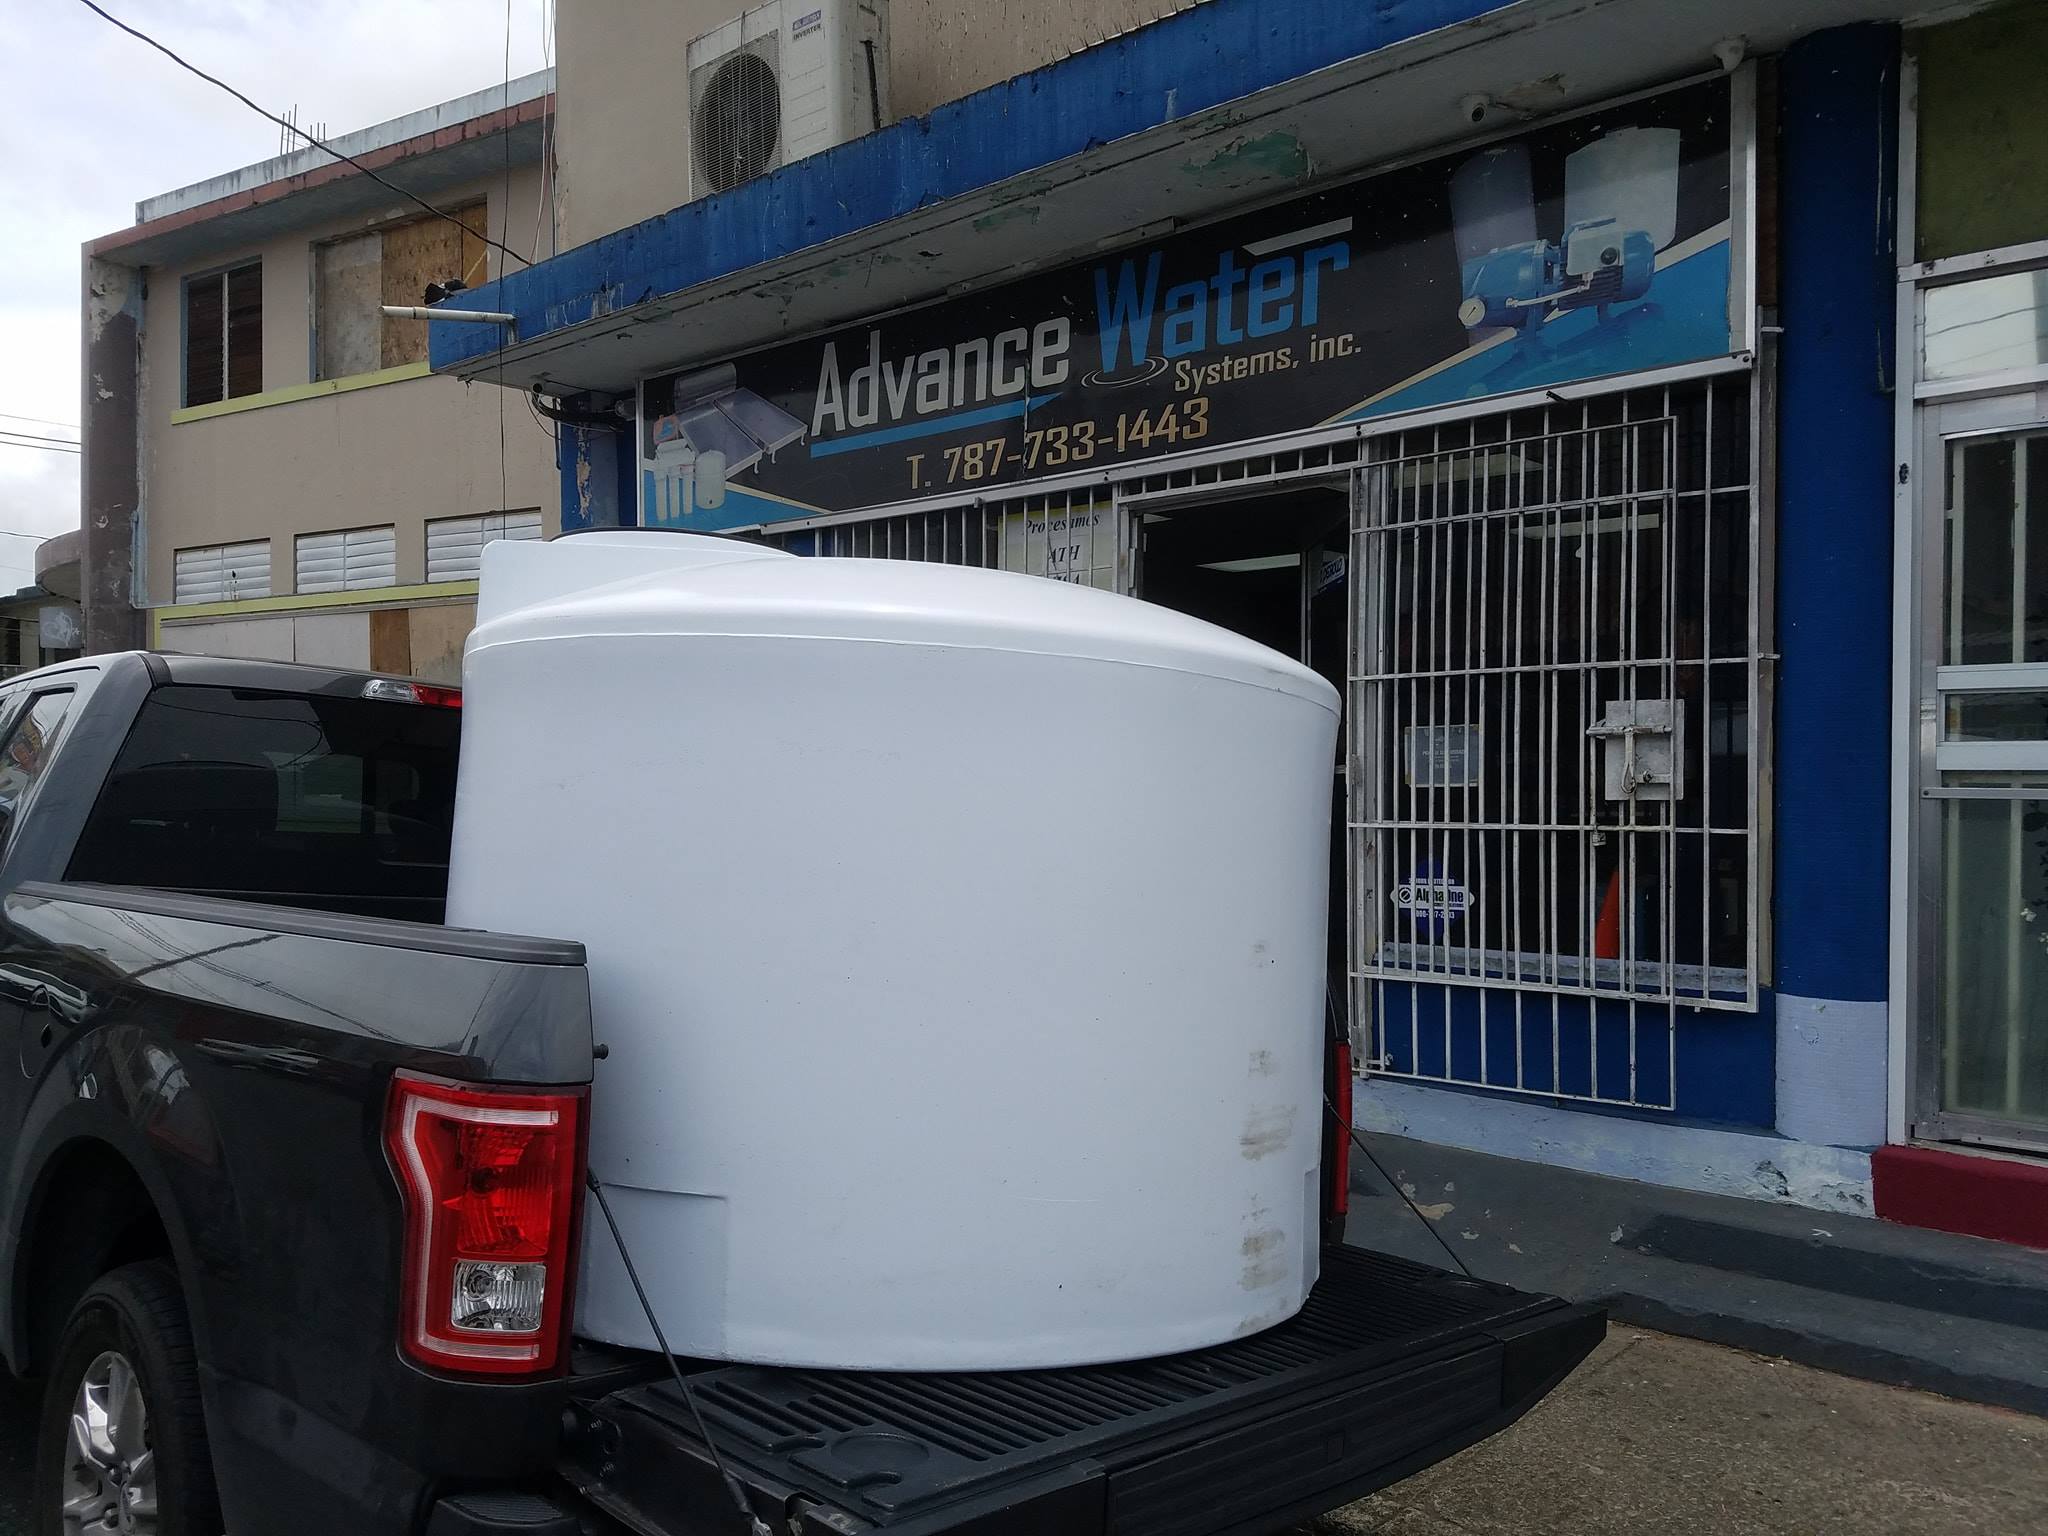 Advance Water Systems Inc-Imagen